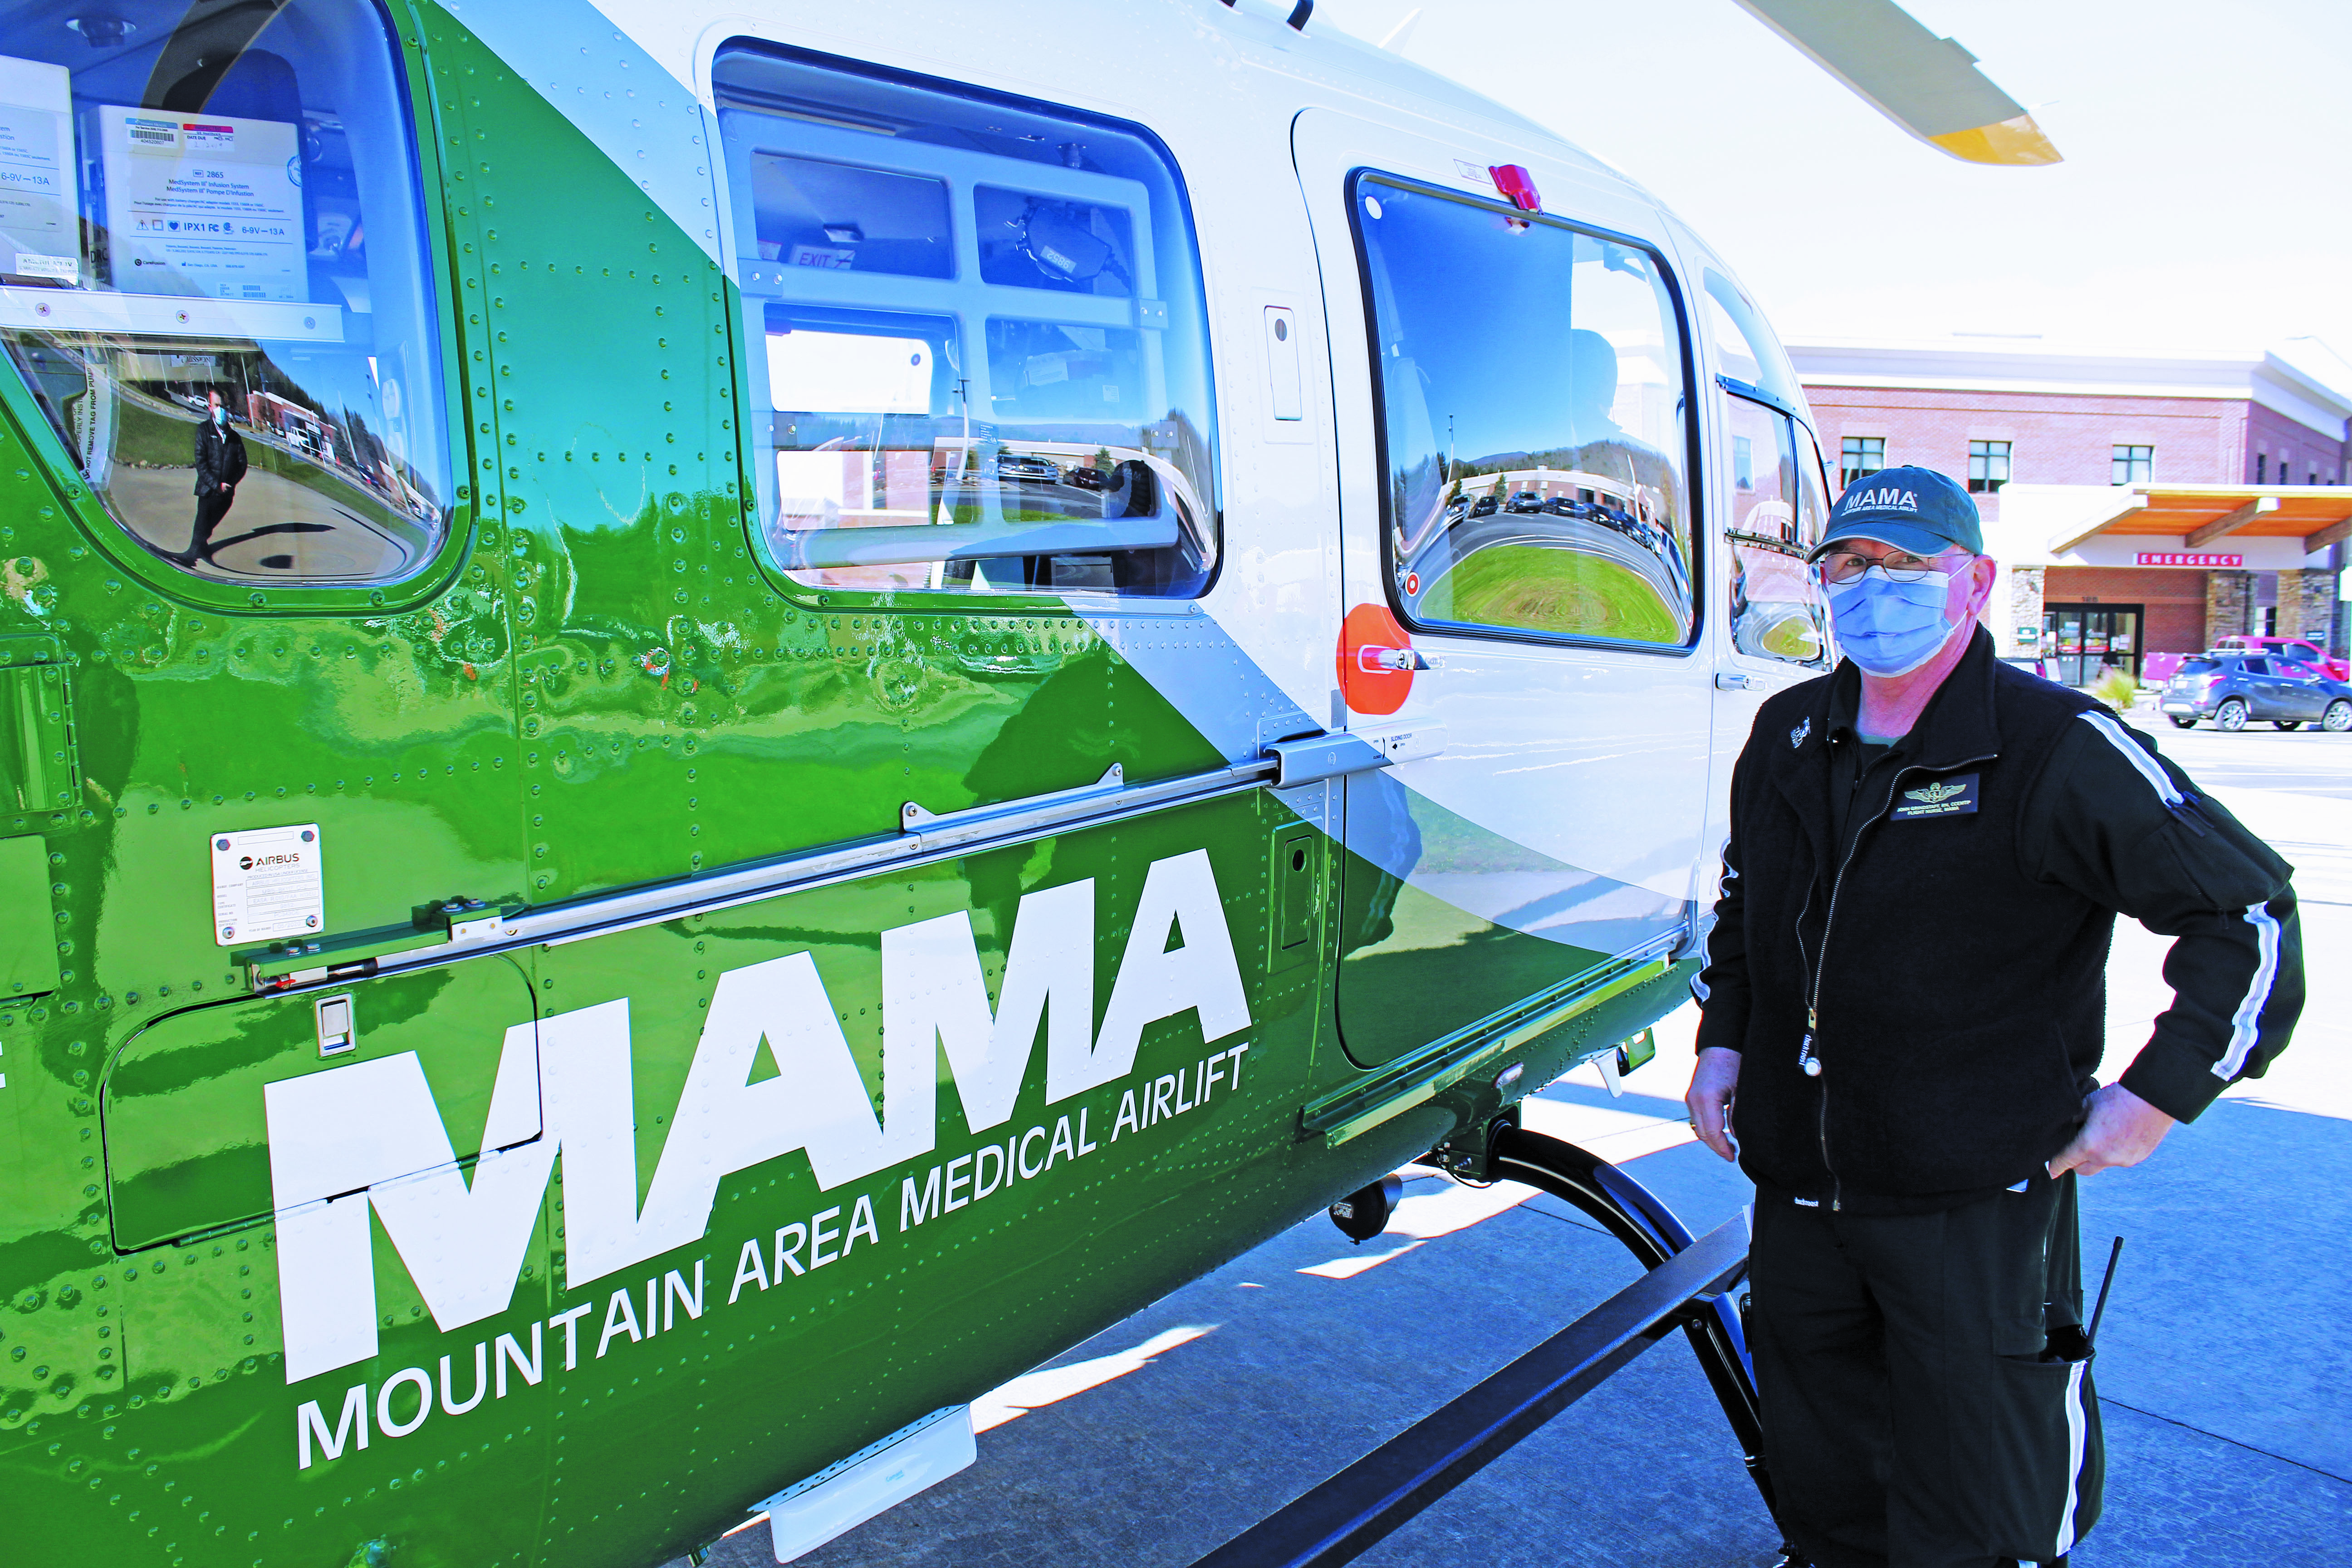 Mountain Area Medical Airlift (MAMA) Supervisor John Grindstaff stands next to the new aircraft and talks about the benefits it will bring to Mission Health and the local communities it serves. (MNJ photo/Cory Spiers)